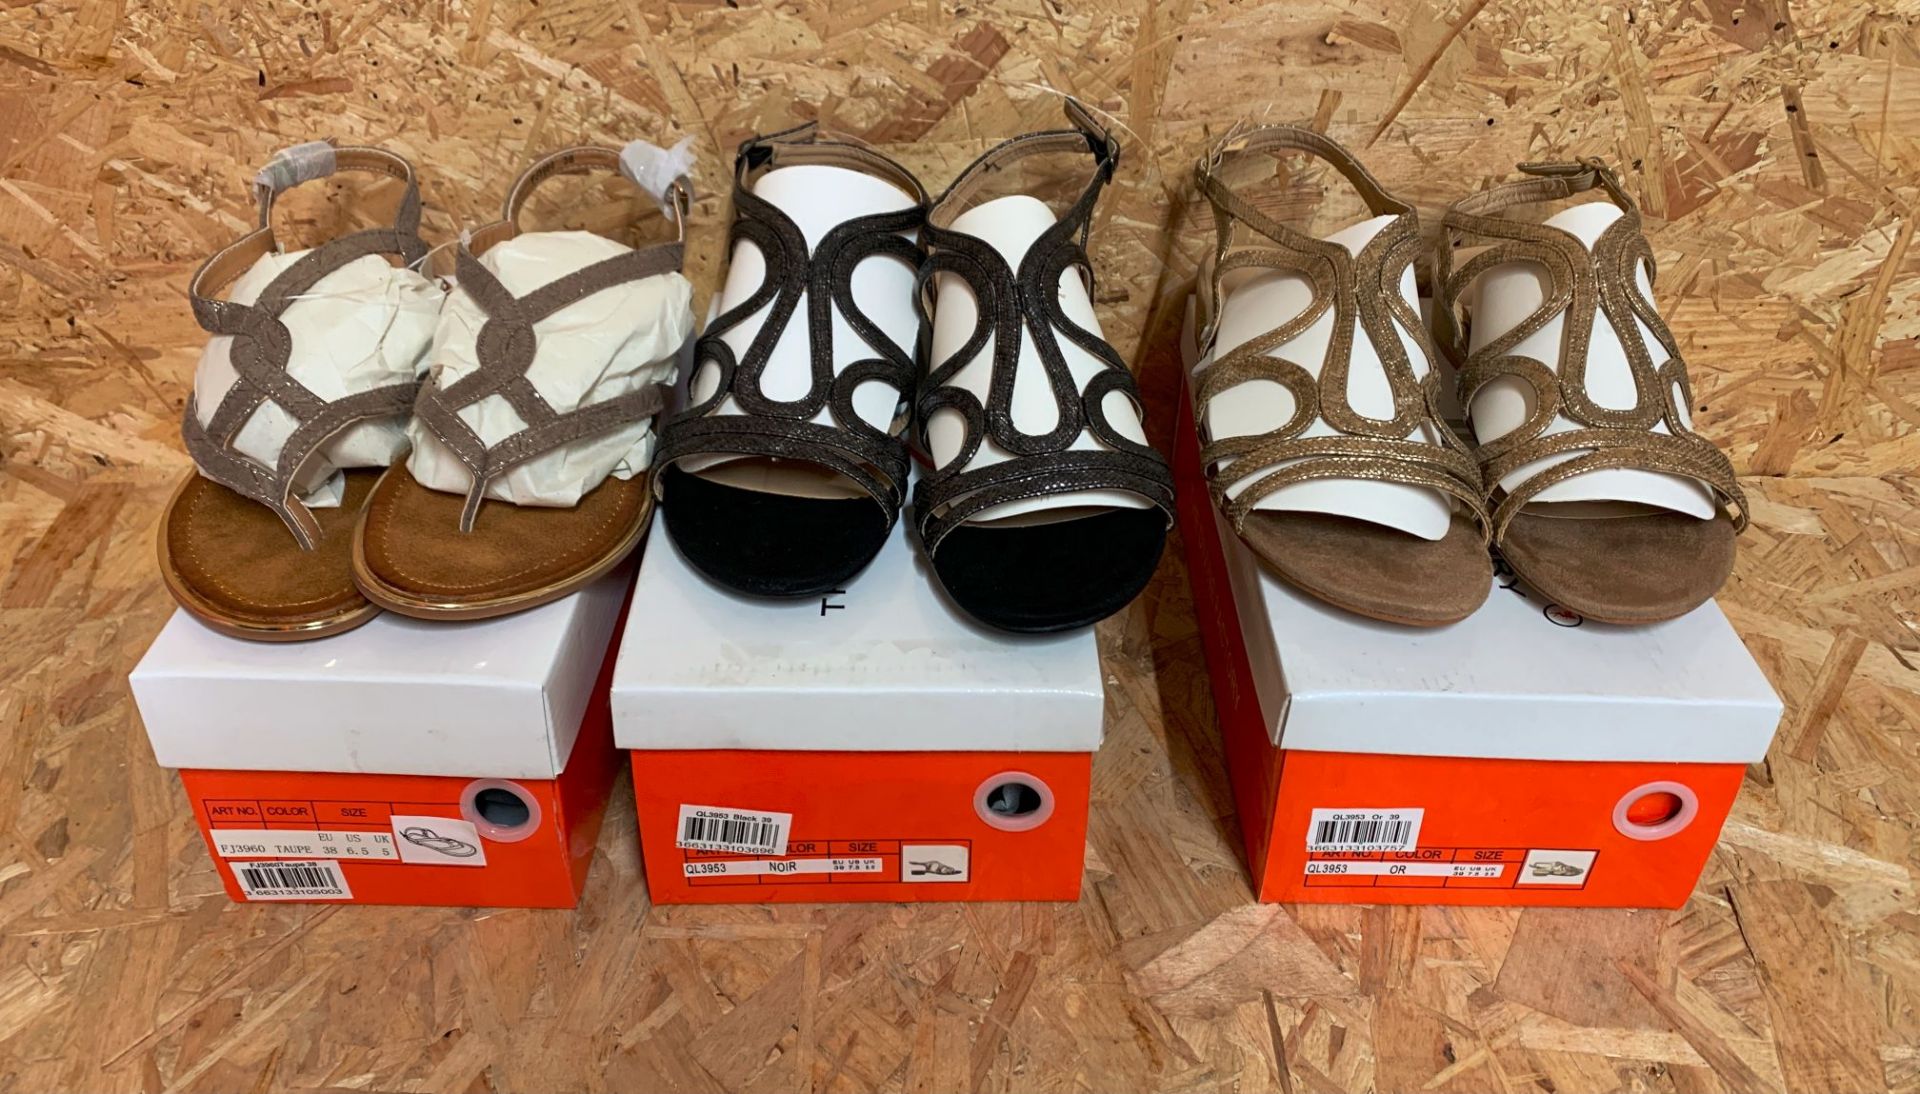 ONE LOT TO CONTAINS 3 x PAIRS OF DIVINE FACTORY LADIES SANDALS IN TAUPE, NOIR AND OR